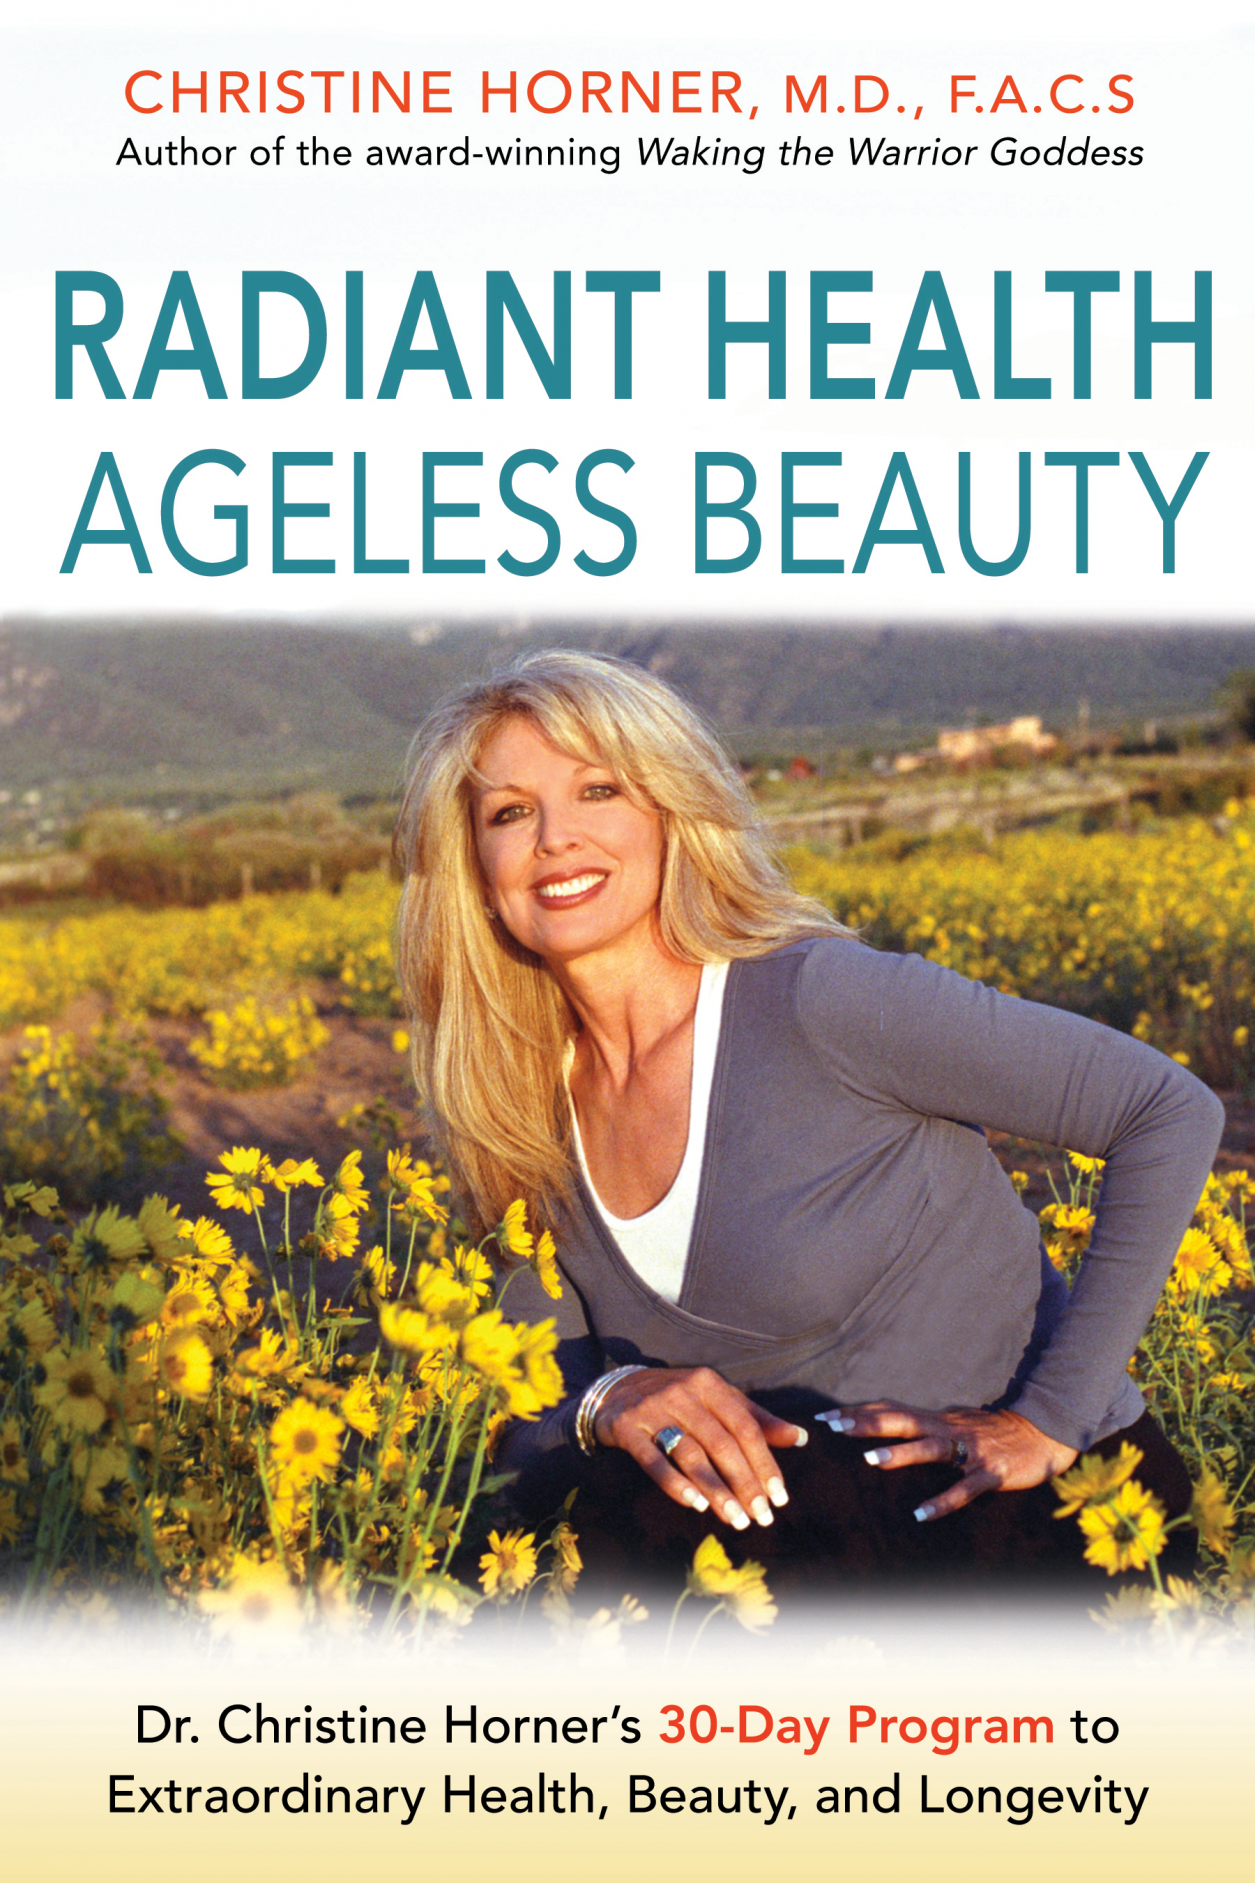 Radiant Health, Ageless Beauty by Dr. Christine Horner, MD